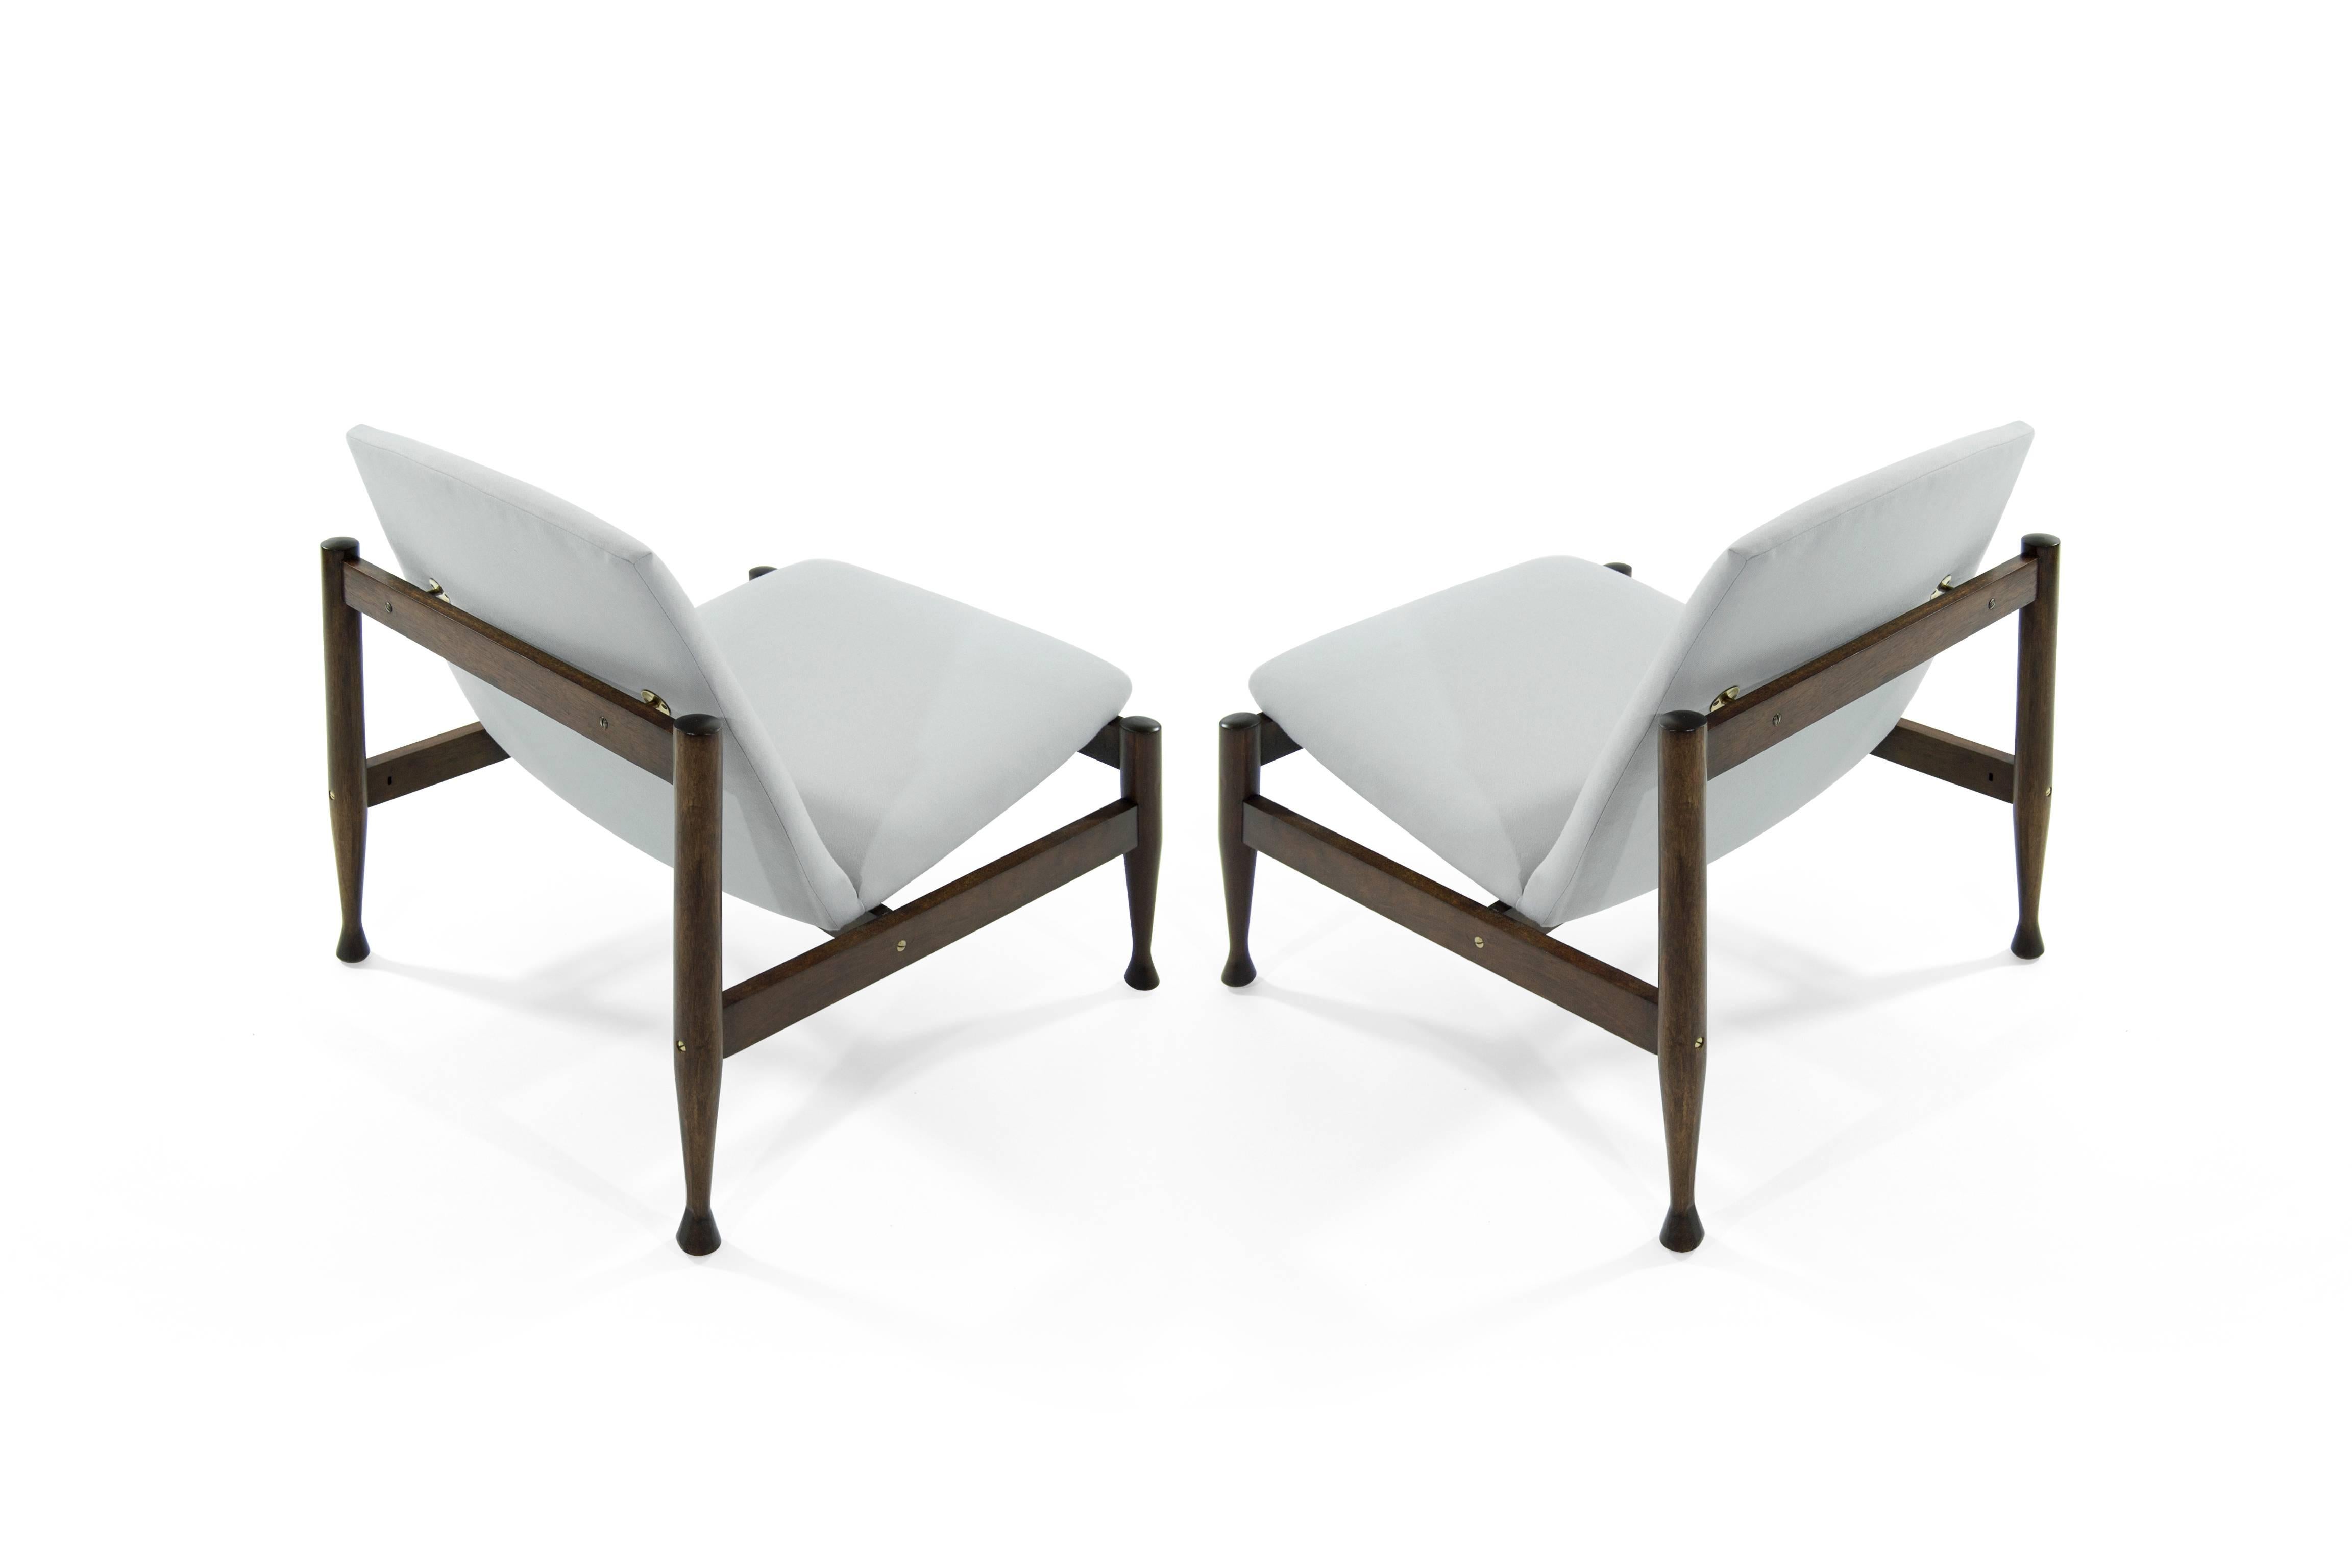 20th Century Danish Modern Brass Accented Lounge Chairs in the Style of Finn Juhl